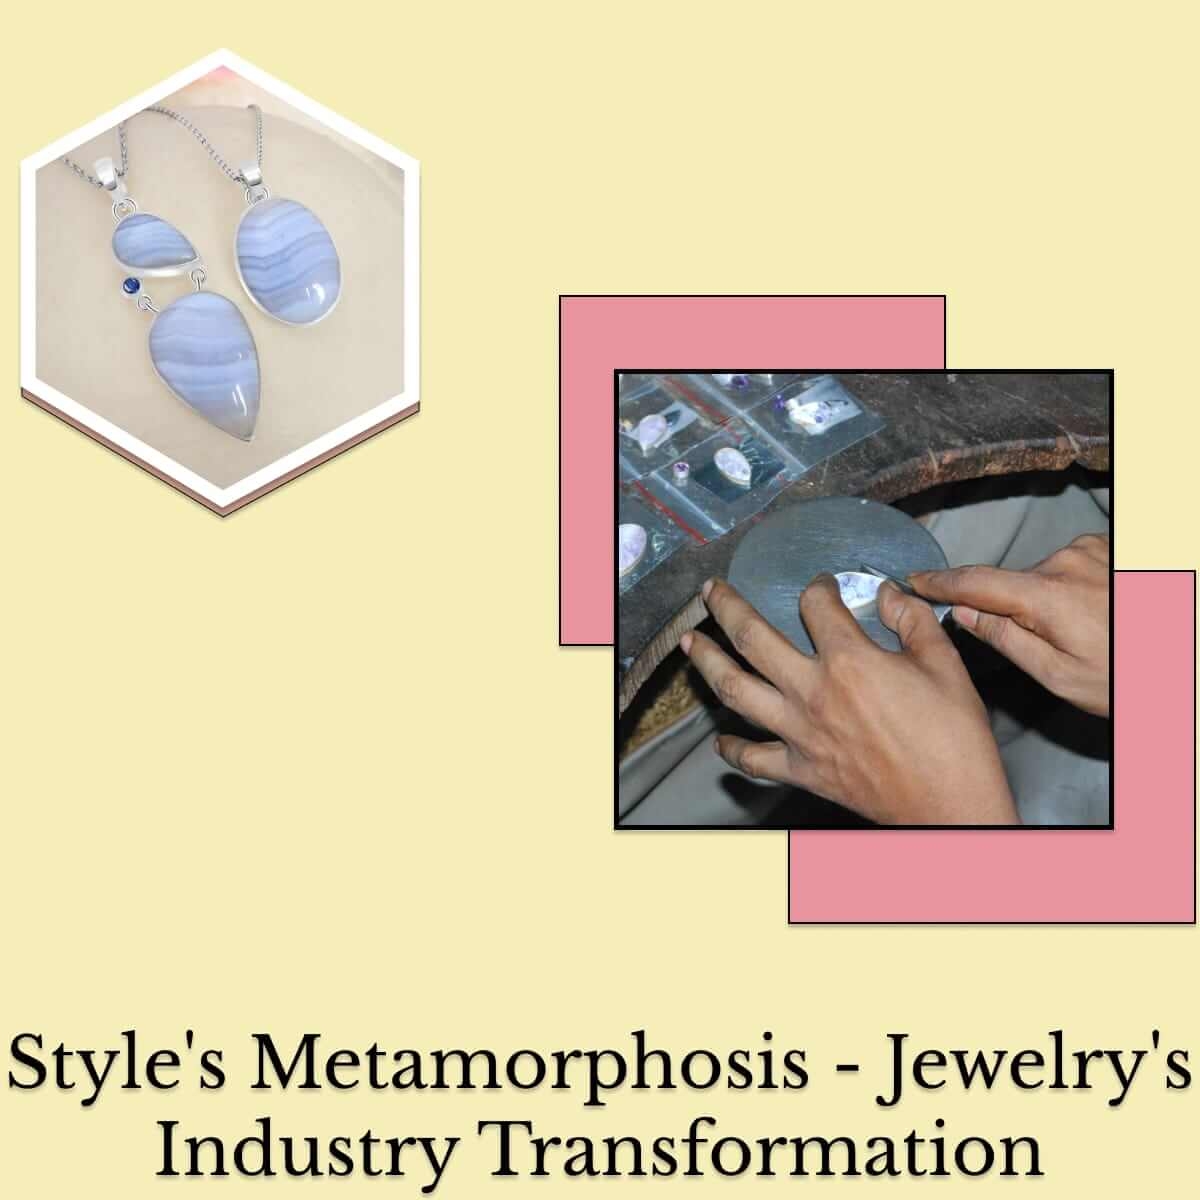 Transformative Impact on Style and the Jewelry Industry